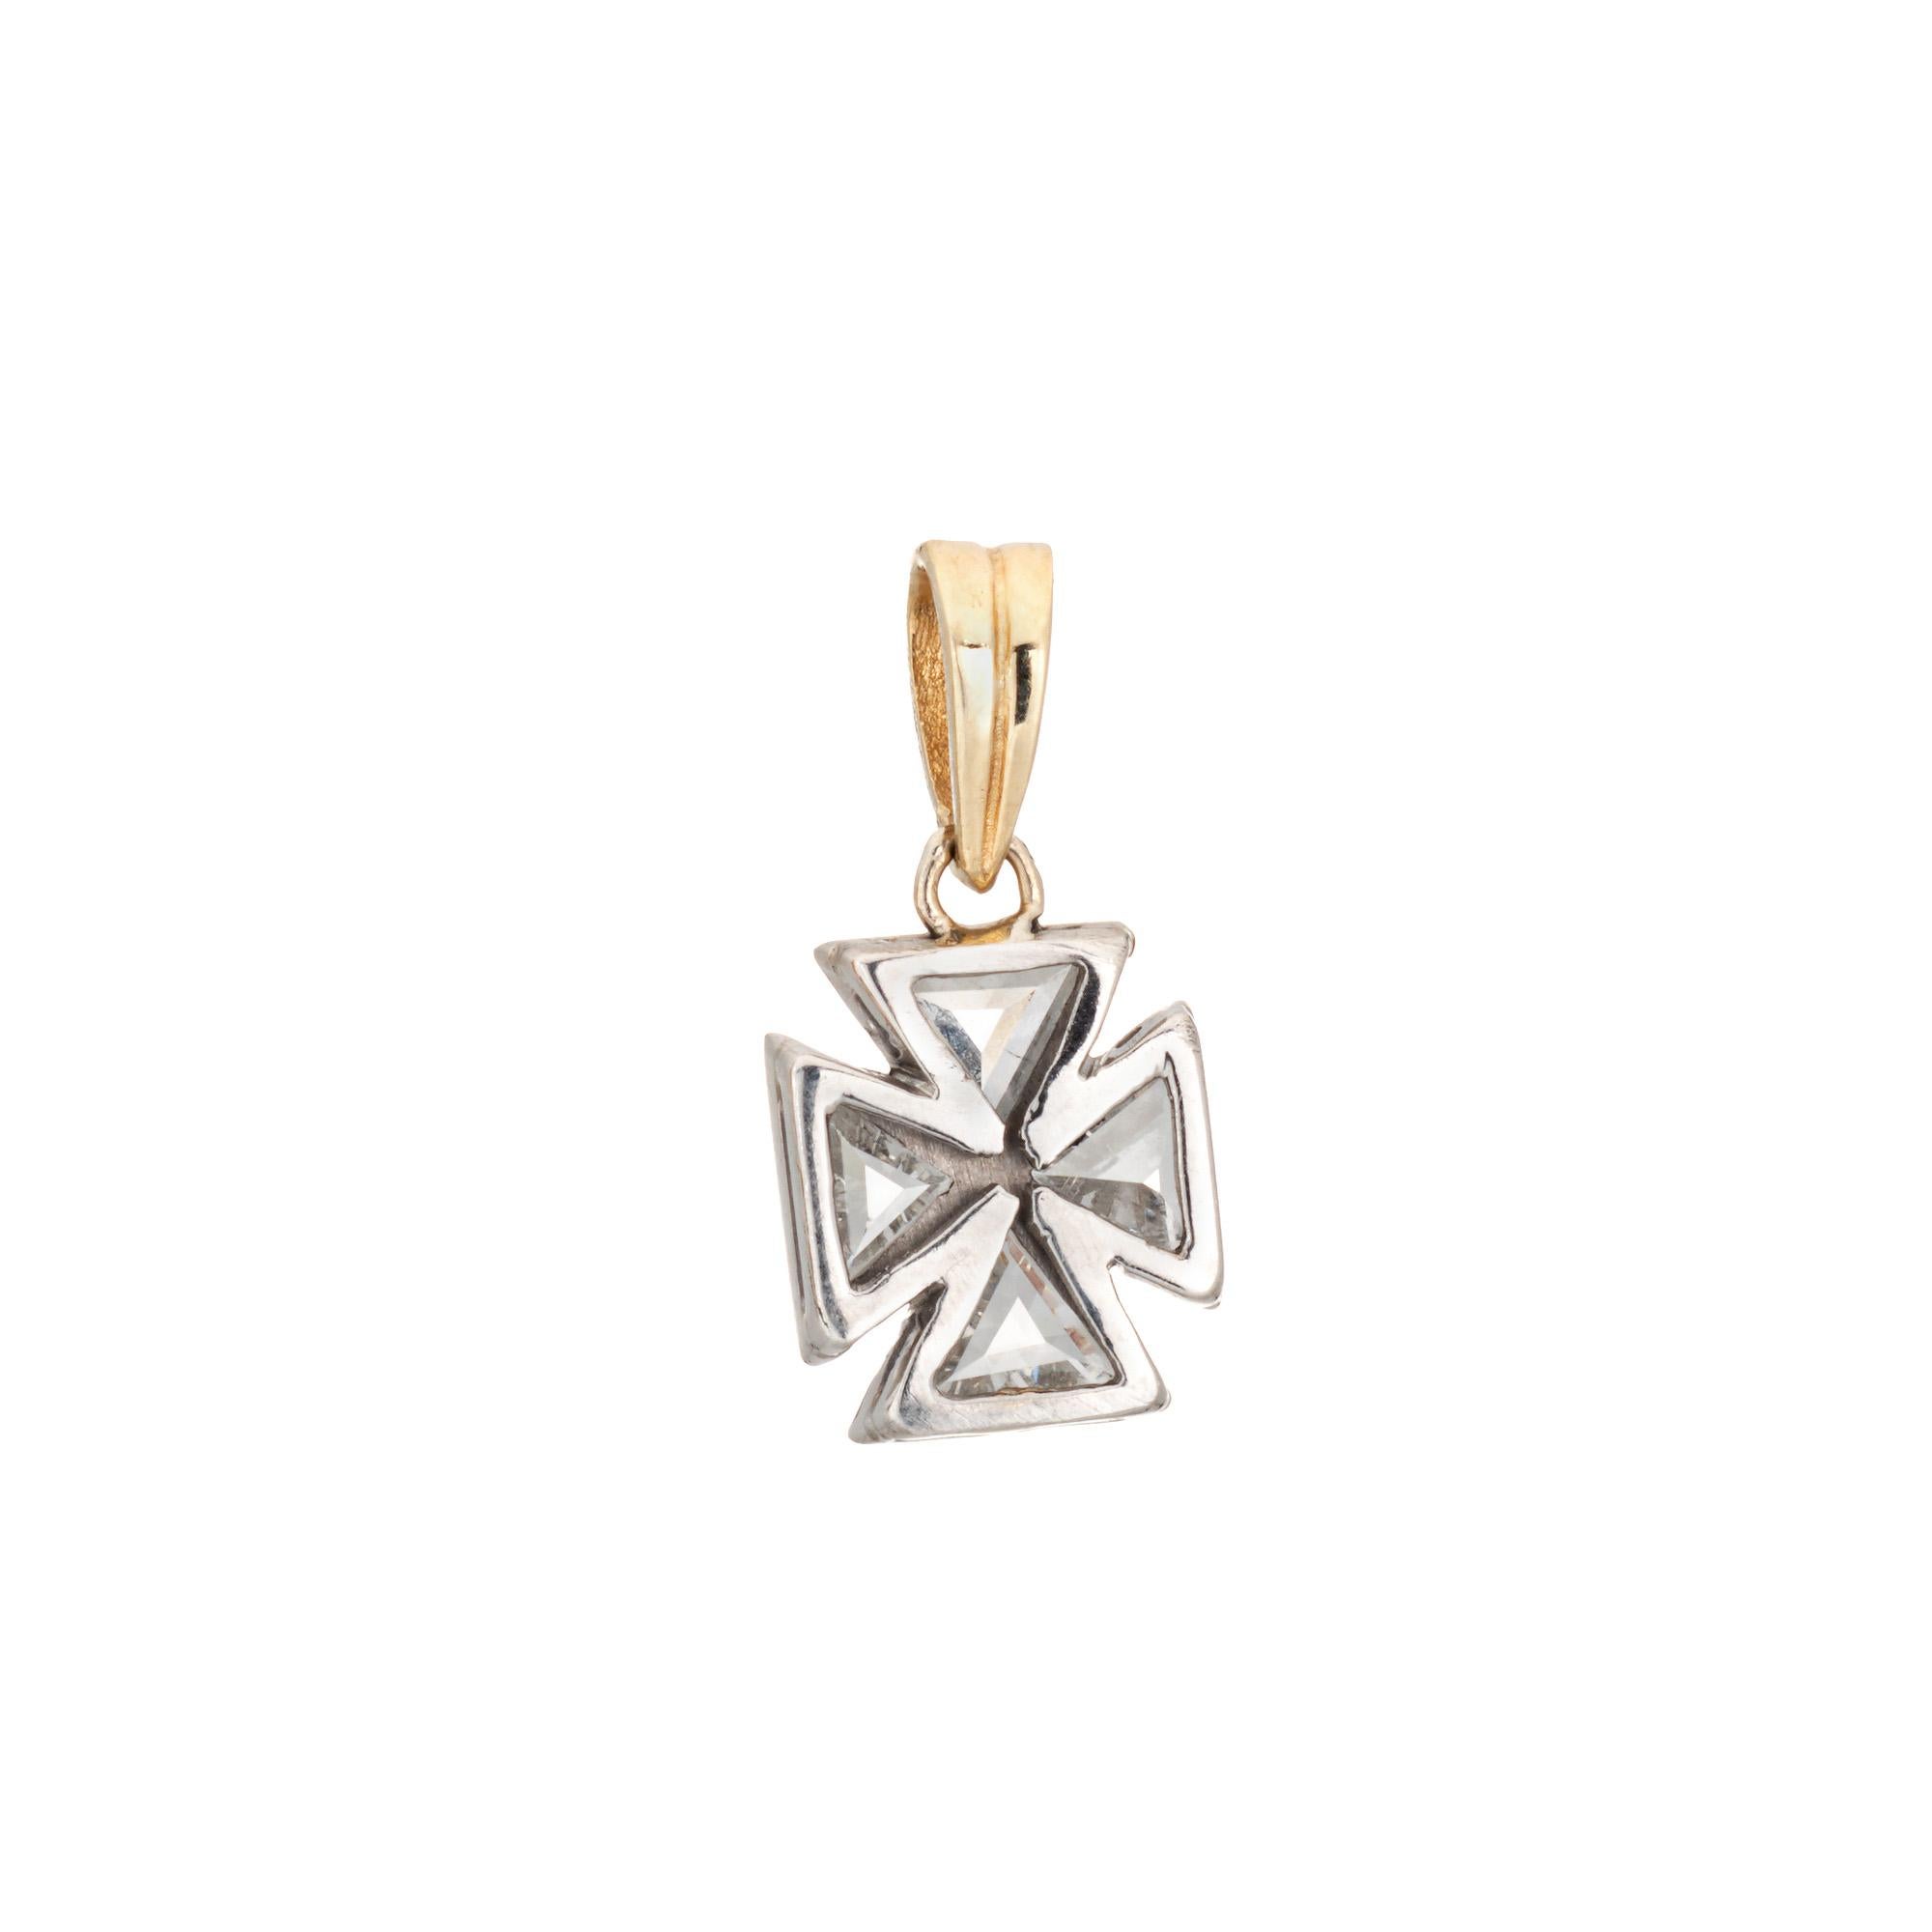 Finely detailed vintage Art Deco era Maltese Cross pendant crafted in 900 platinum & 14 karat yellow gold (circa 1920s to 1930s). 

Four triangular cut diamonds total an estimated 0.80 carats (estimated at H-I color and VS2-SI1 clarity).   

A